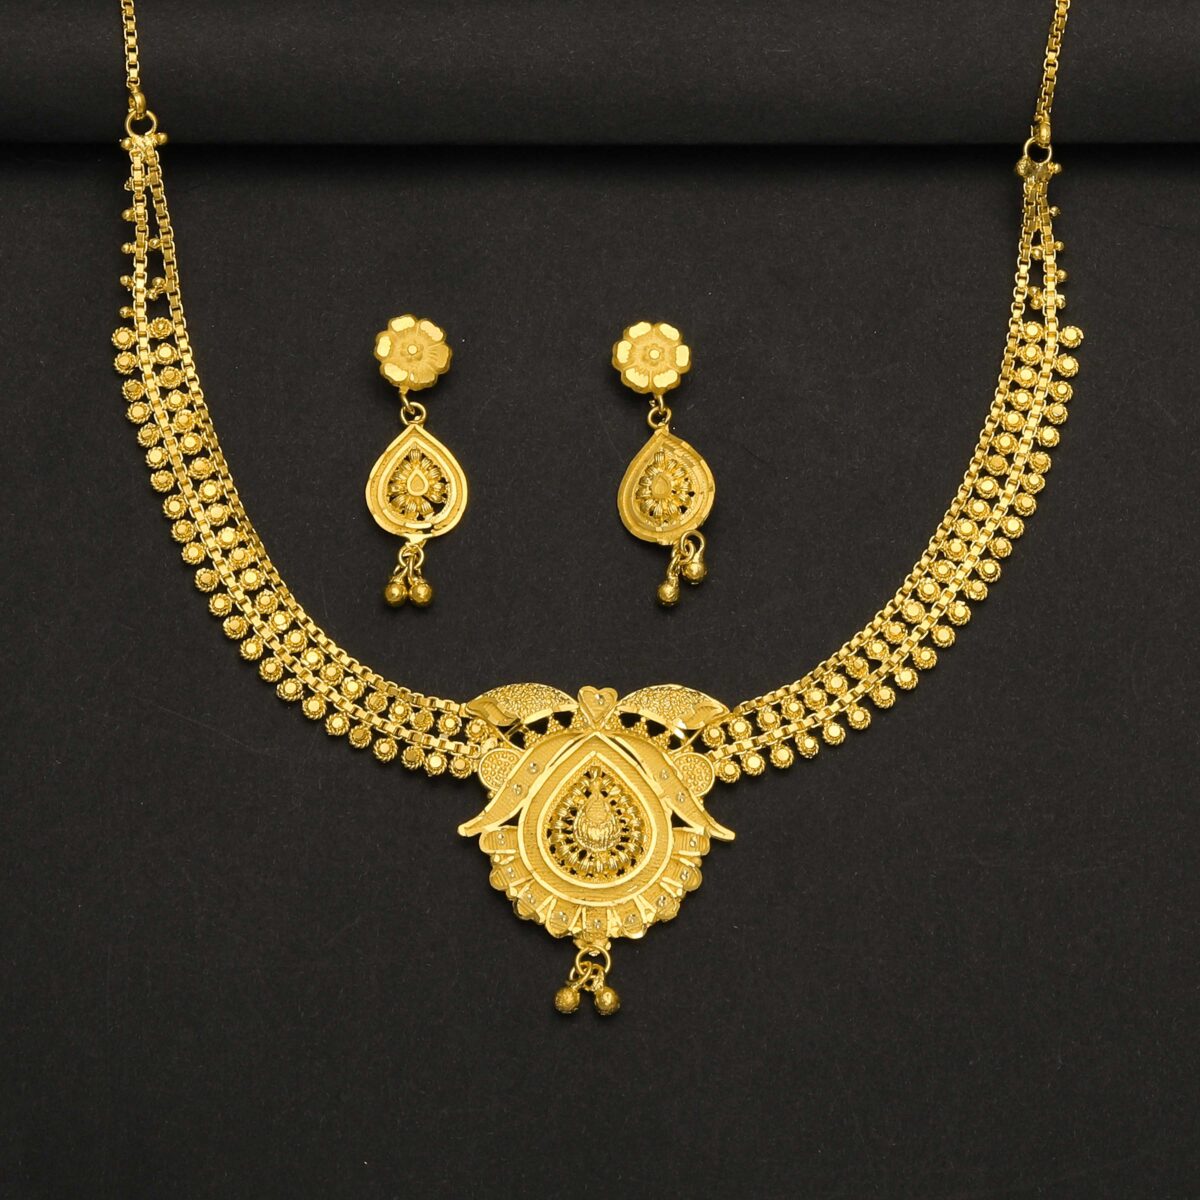 Gold plated round shape necklace with ear rings